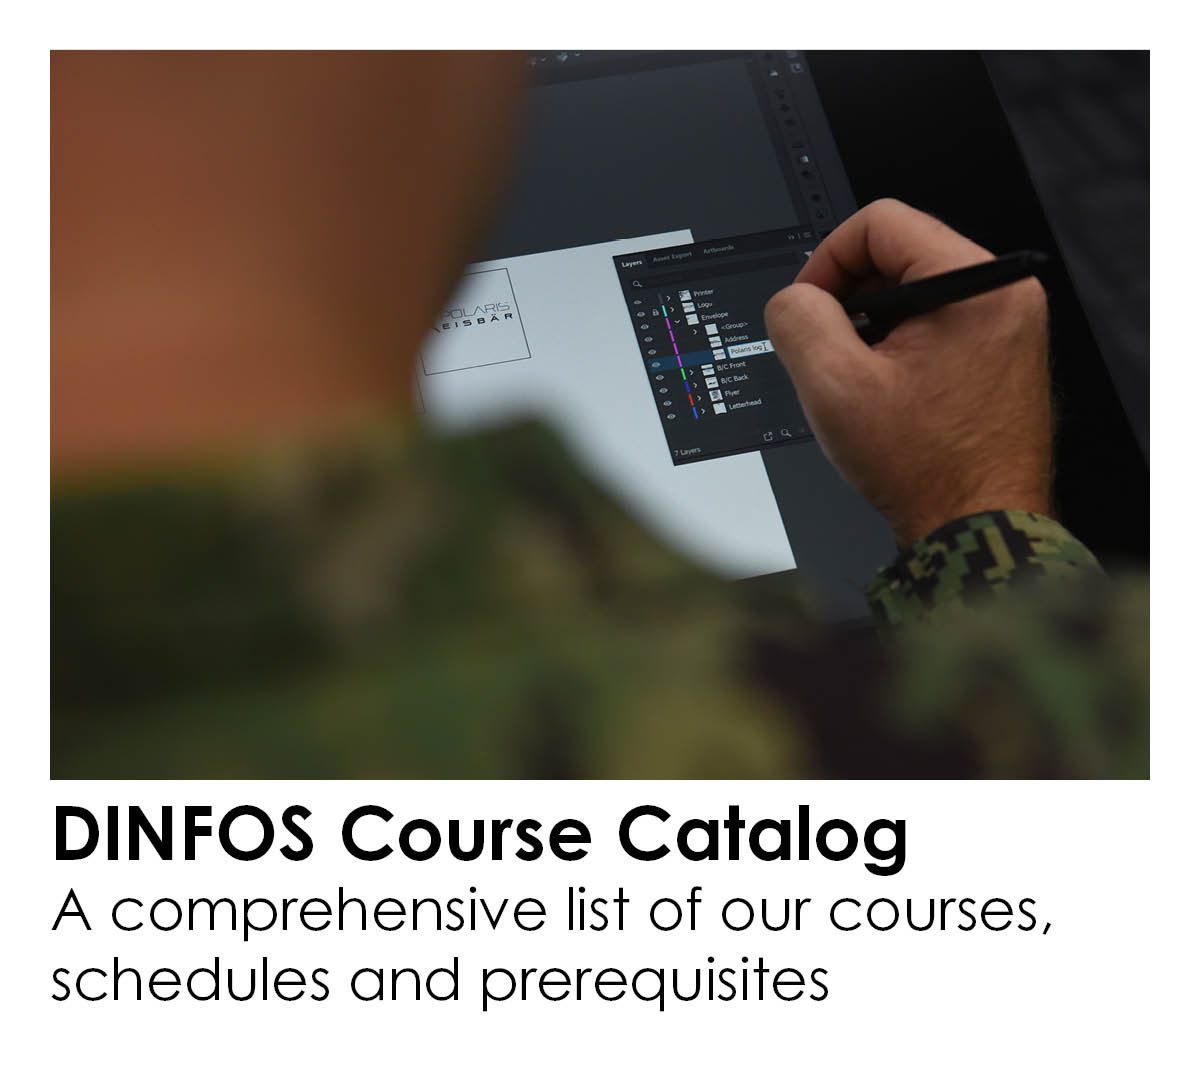 DINFOS Course Catalog - A comprehensive list of our courses, schedules and prerequisites